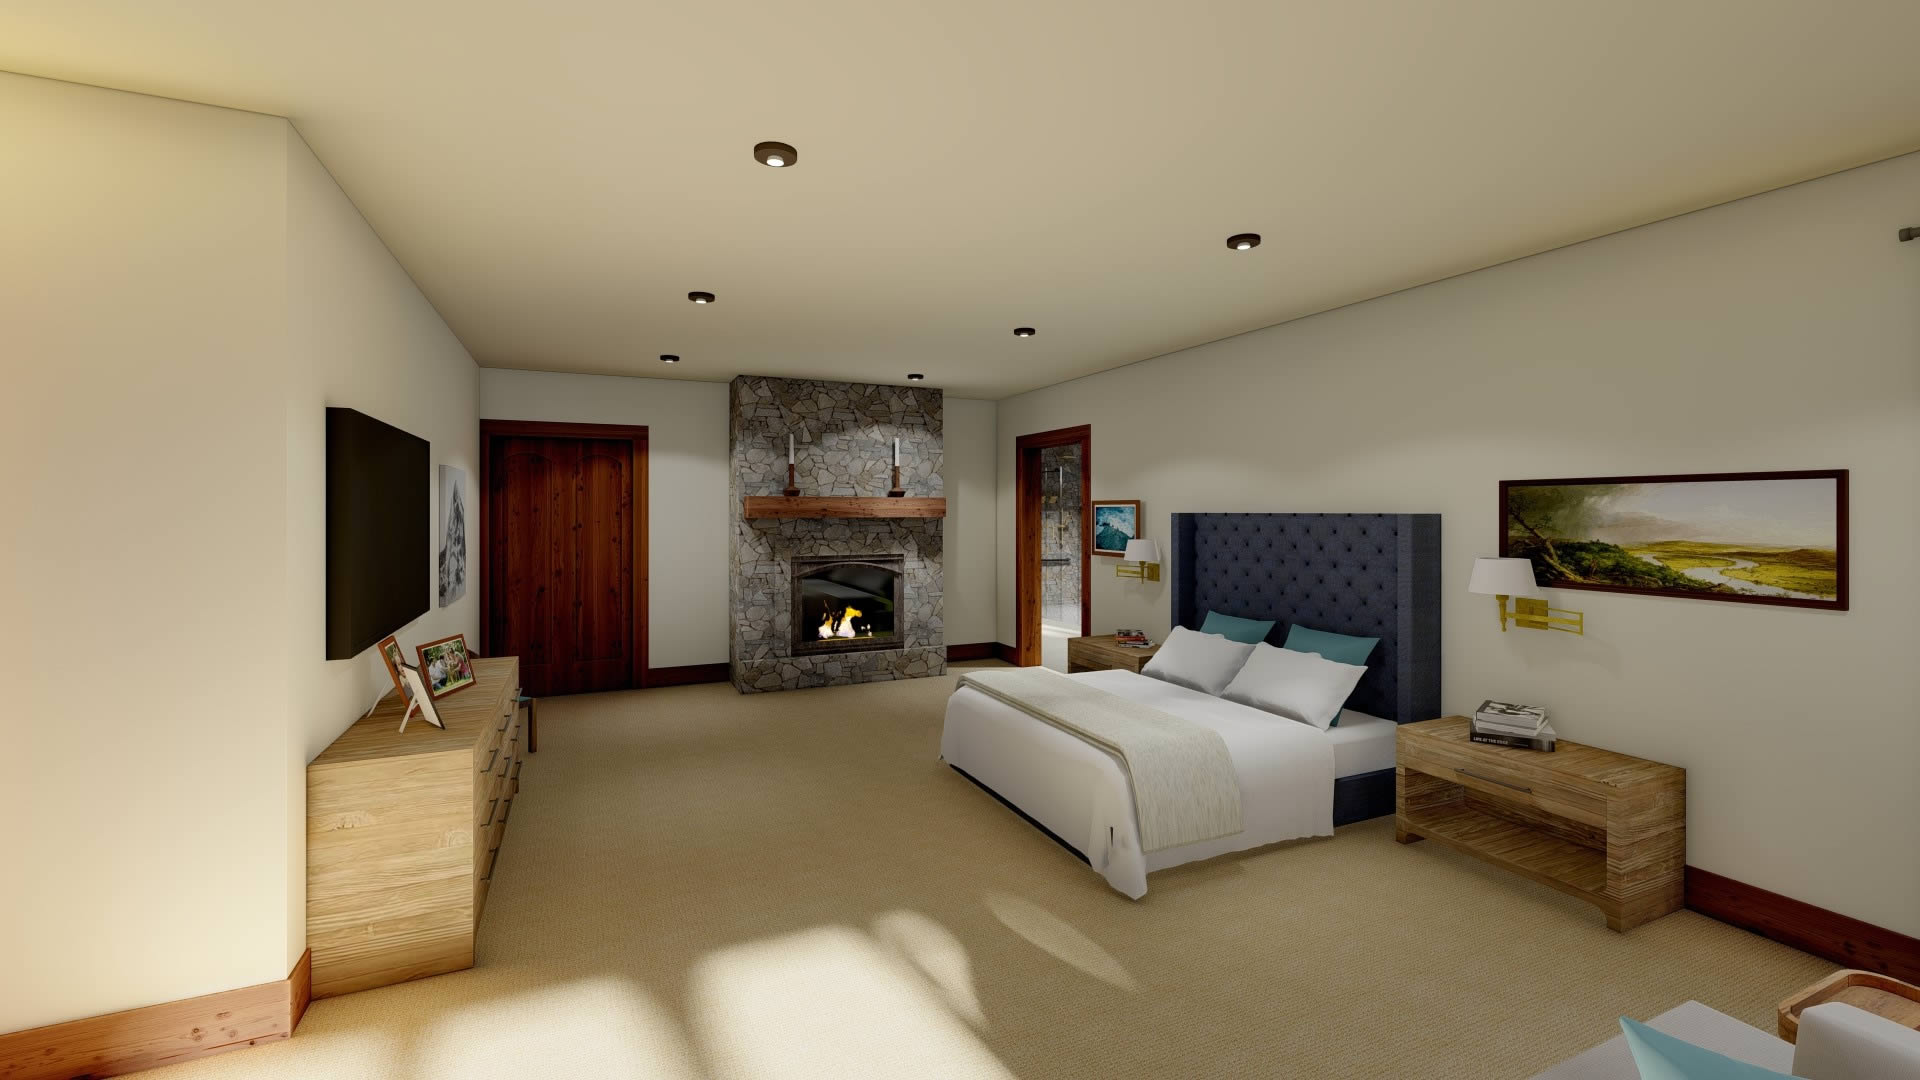 Home Construction Master Suite Remodel